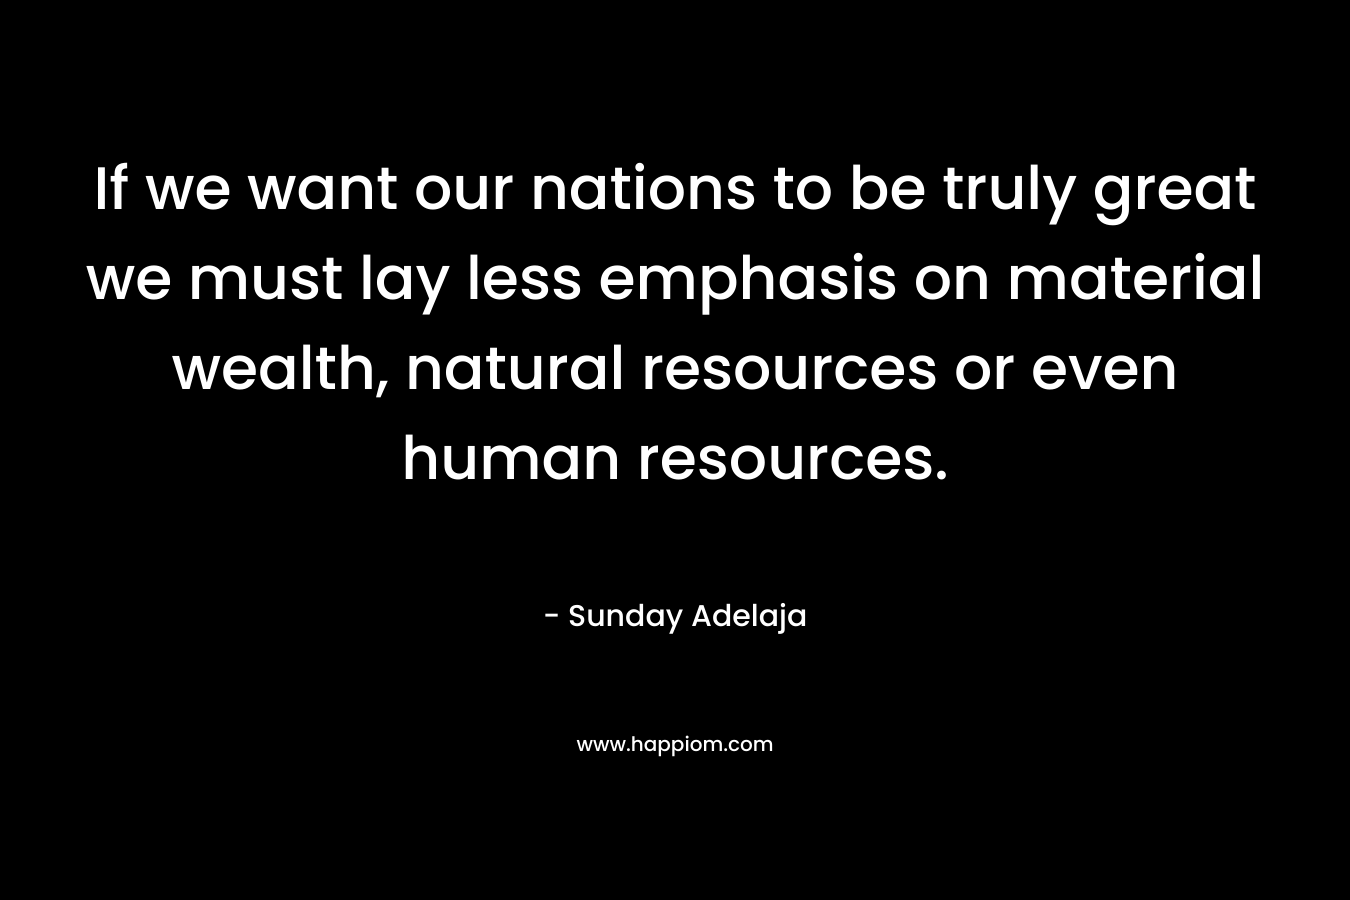 If we want our nations to be truly great we must lay less emphasis on material wealth, natural resources or even human resources.